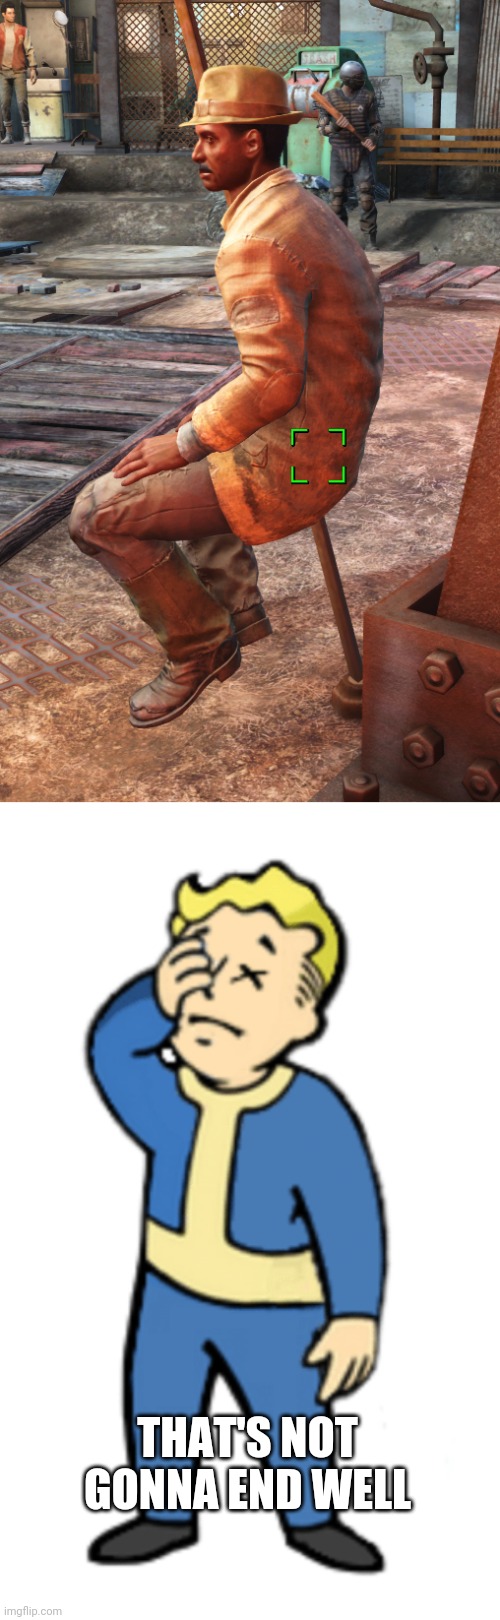 THAT'S GONNA HURT | THAT'S NOT GONNA END WELL | image tagged in fallout 4,fallout,fallout vault boy,fails,glitch | made w/ Imgflip meme maker